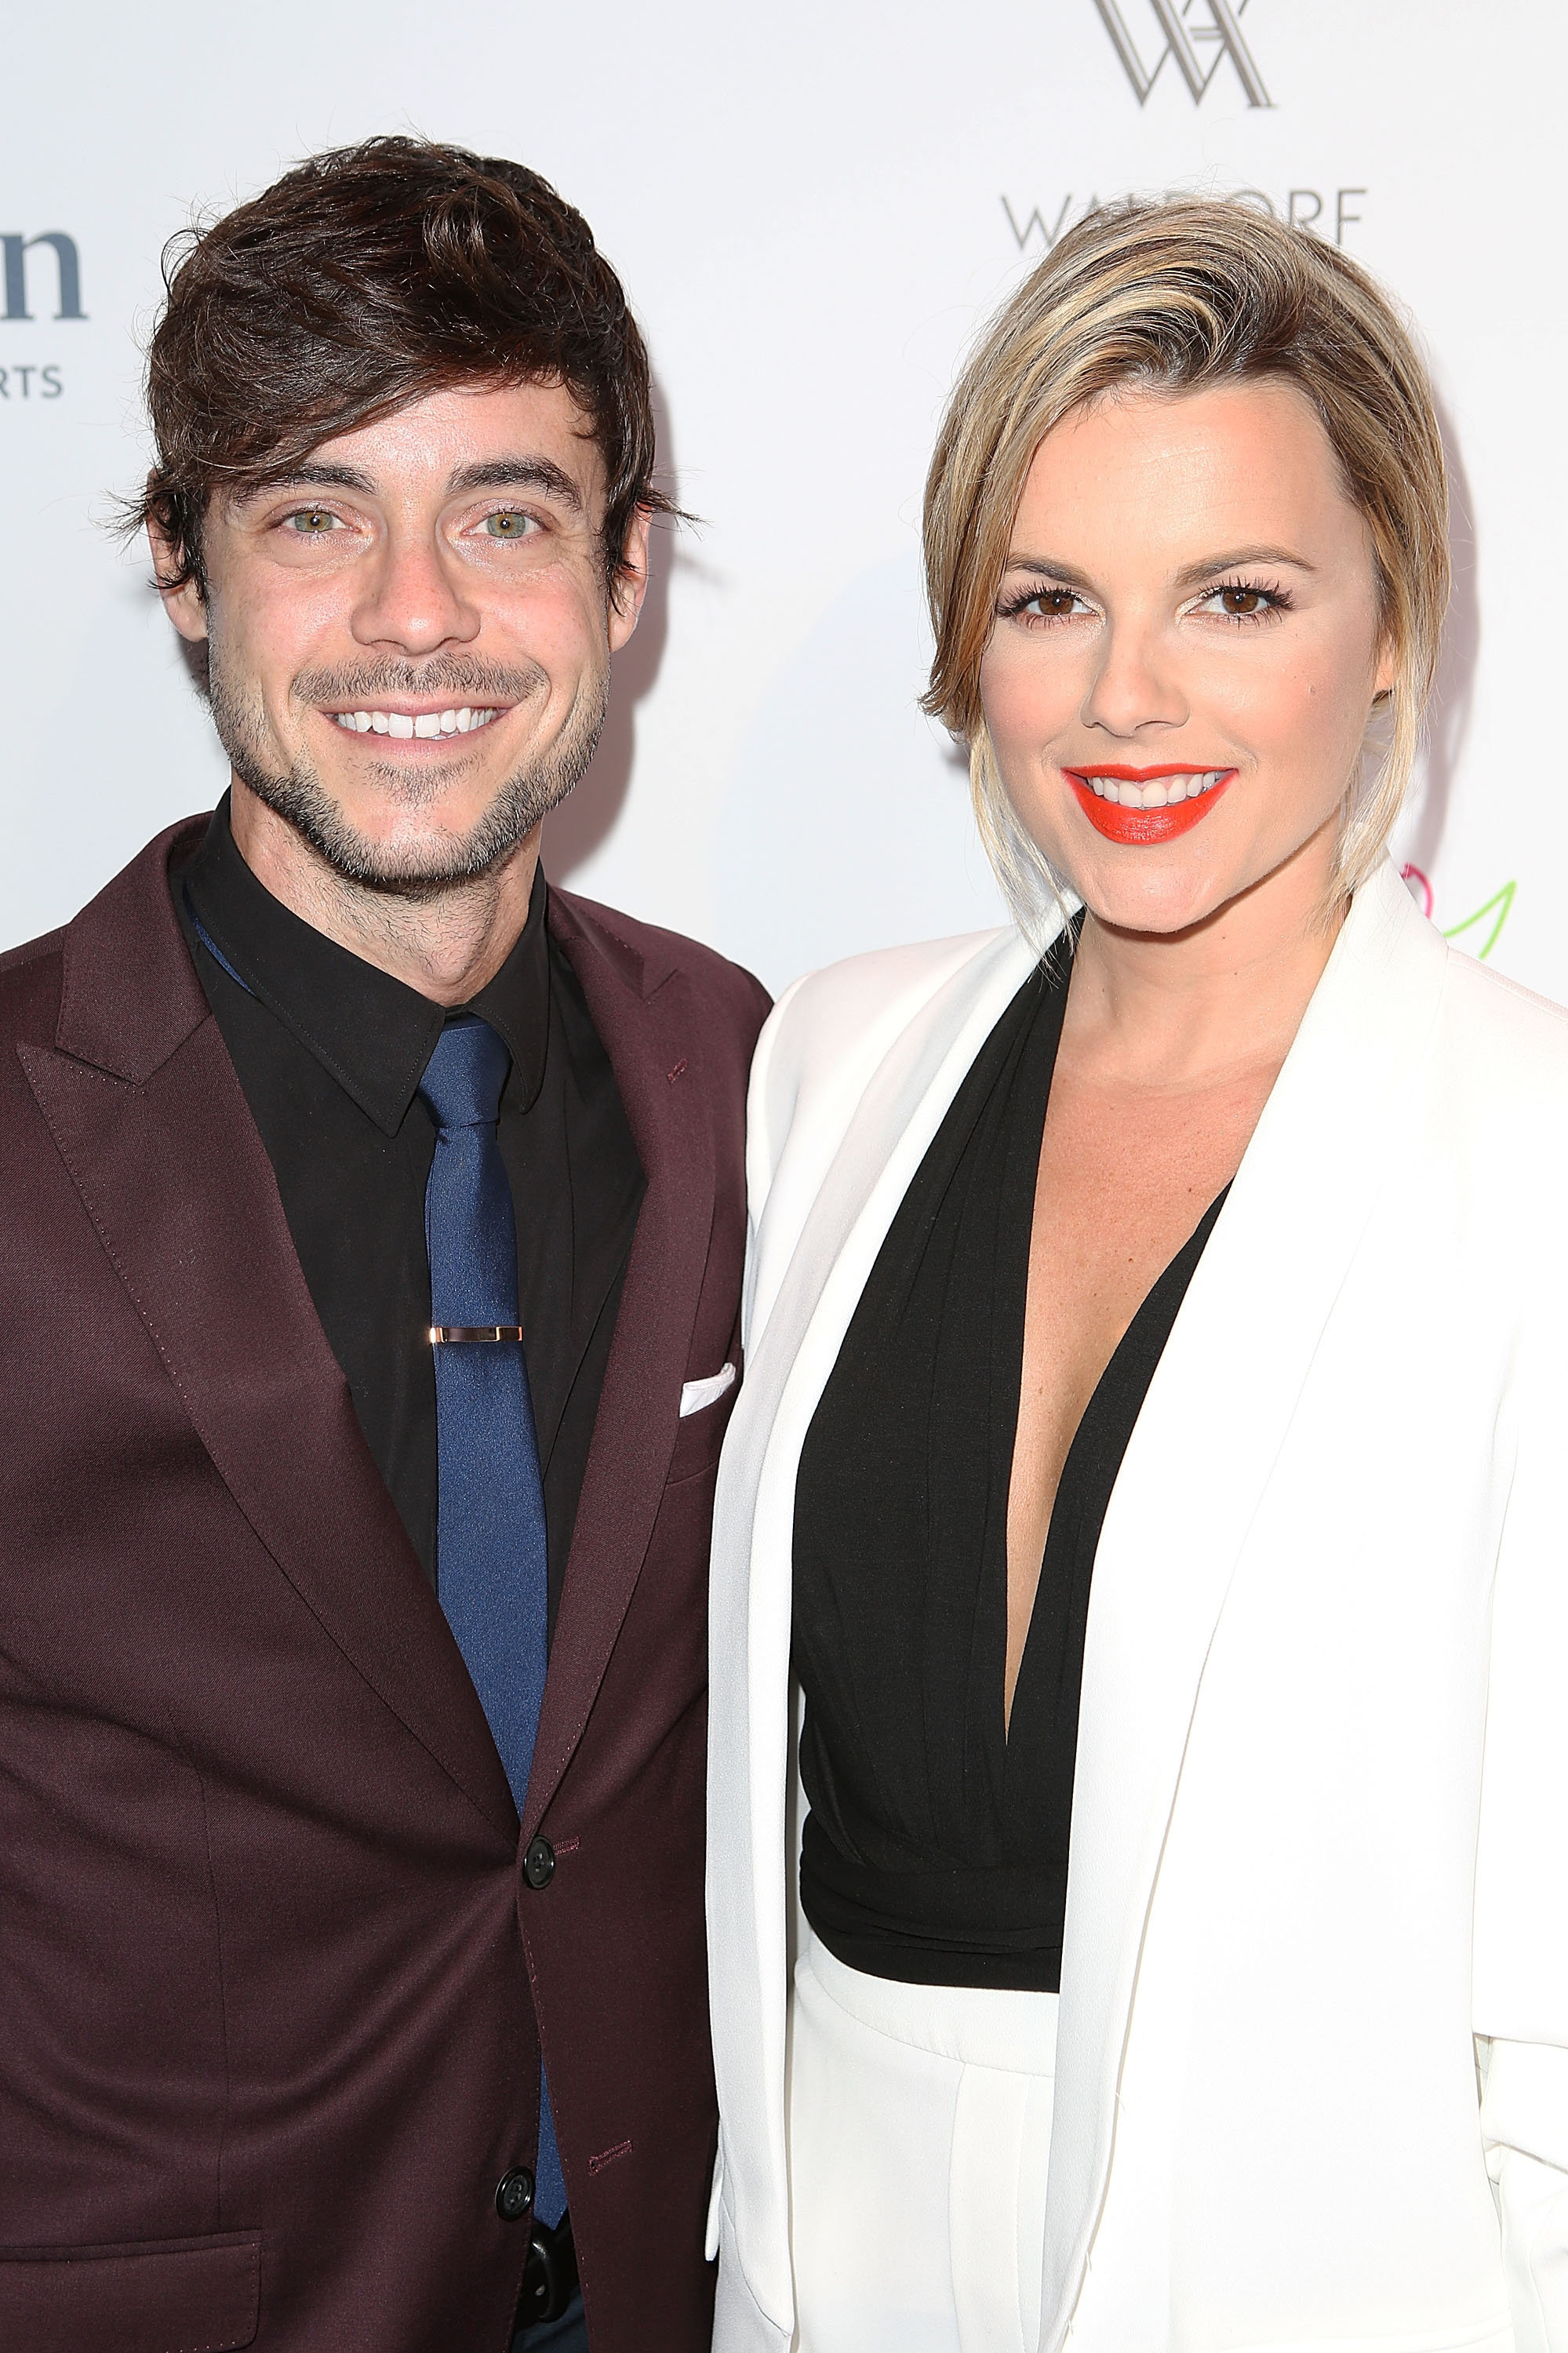 Former Bachelorette Ali Fedotowsky Expecting First Baby With Fiancé Kevin Manno HuffPost Entertainment